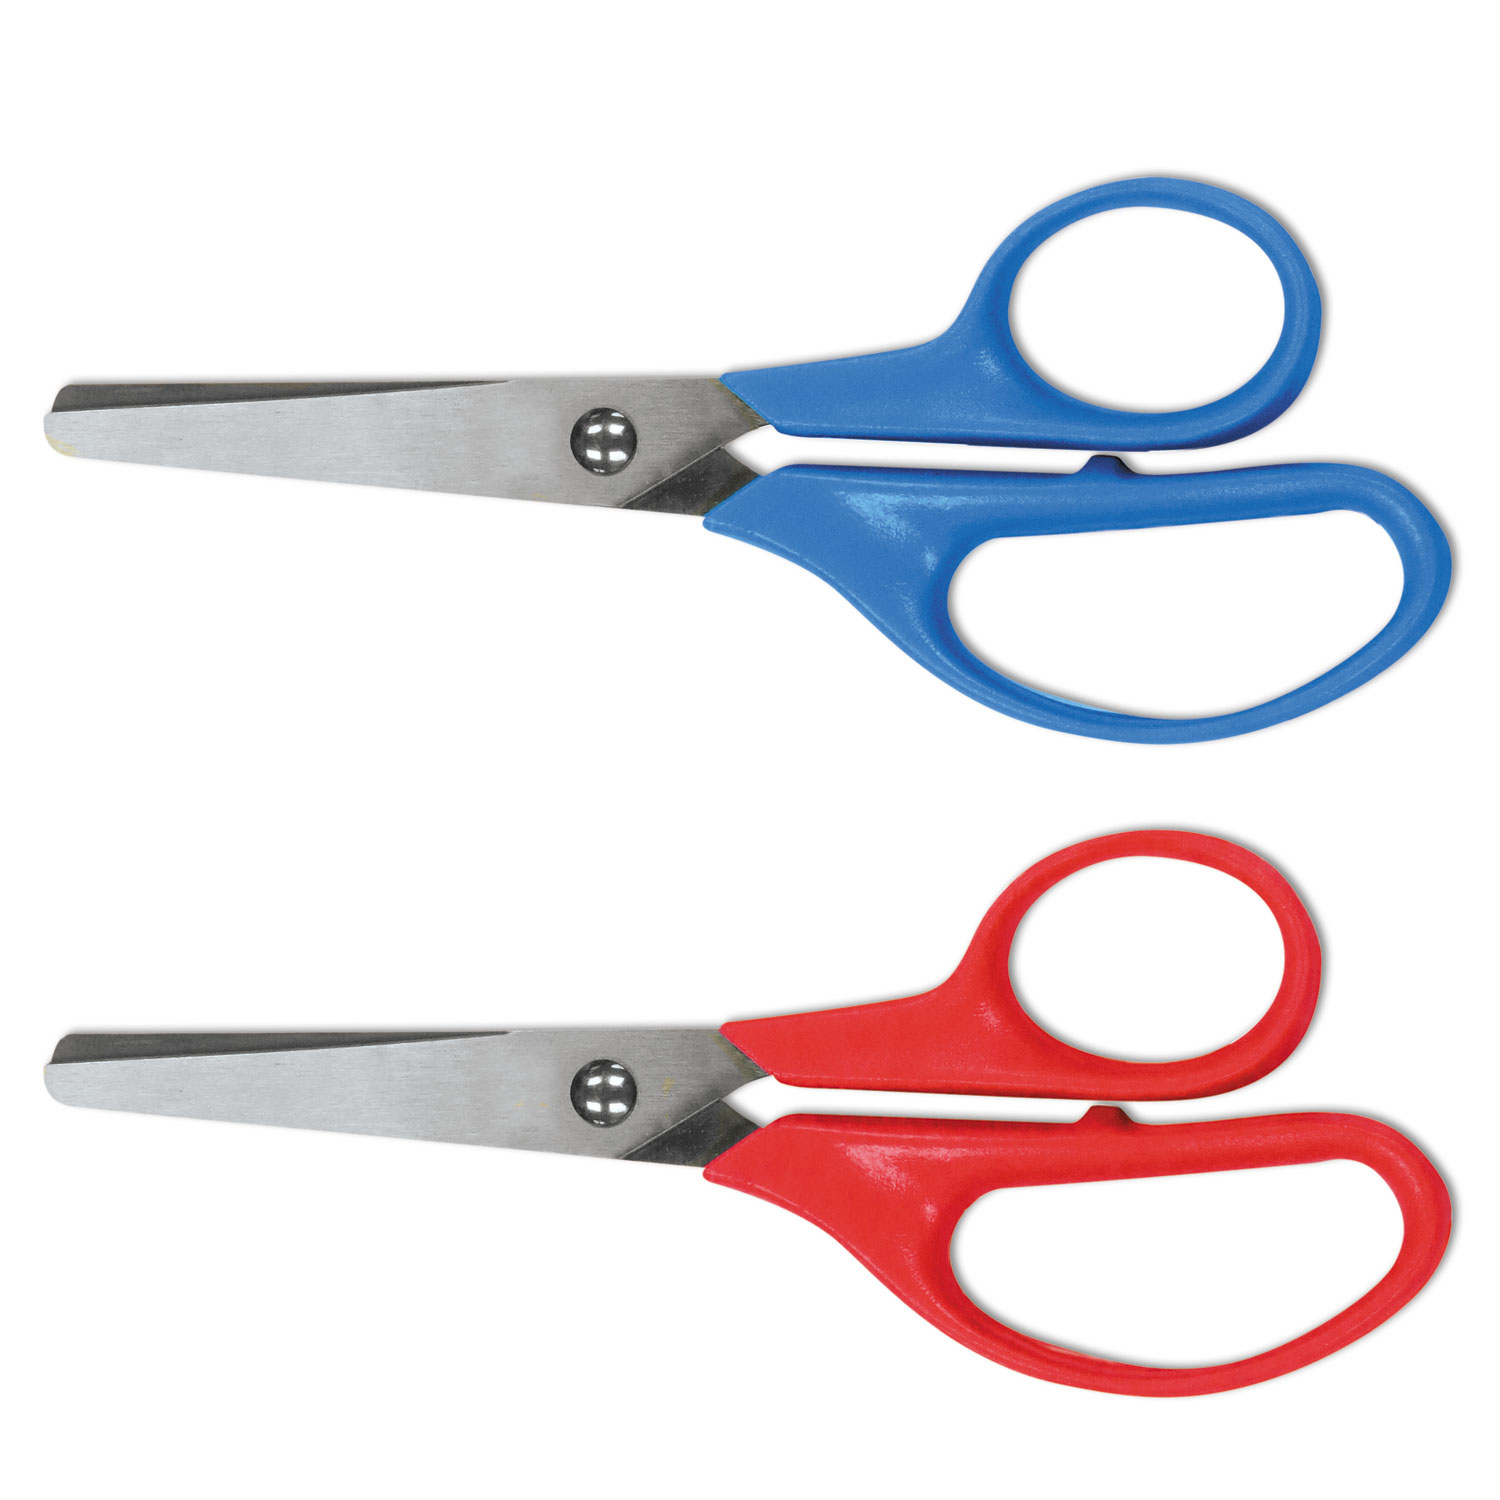  Universal UNV92024 Kids' Scissors, Rounded Tip, 5 Long, 1.75 Cut Length, Assorted Straight Handles, 2/Pack (UNV92024) 